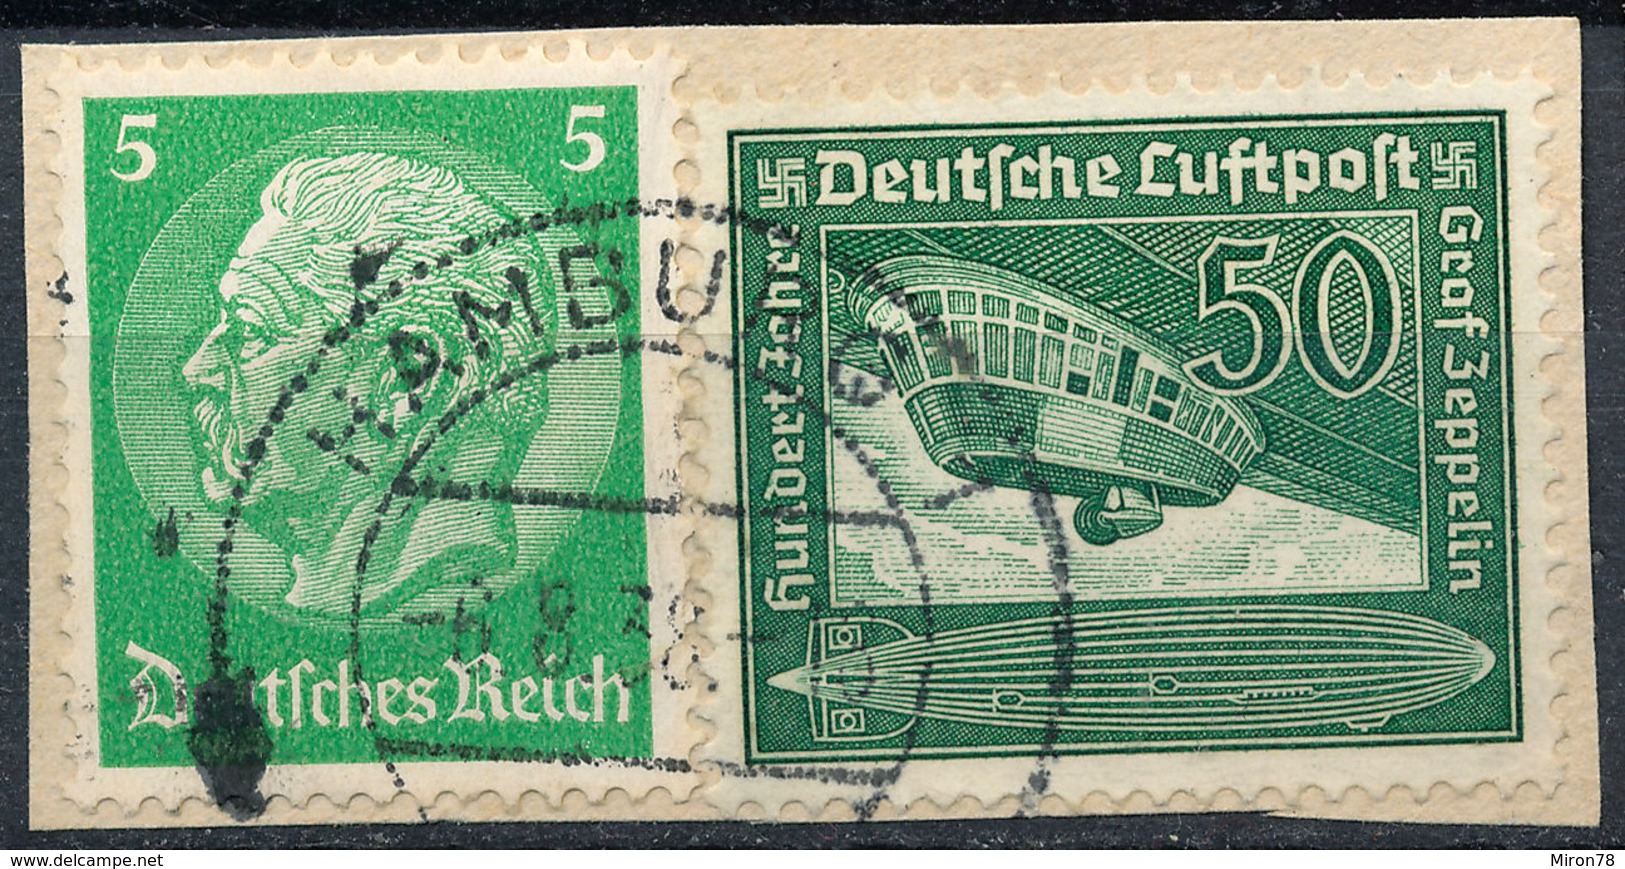 Stamp Germany Airmail Zeppelin 1938 Used Lot#20 - Airmail & Zeppelin